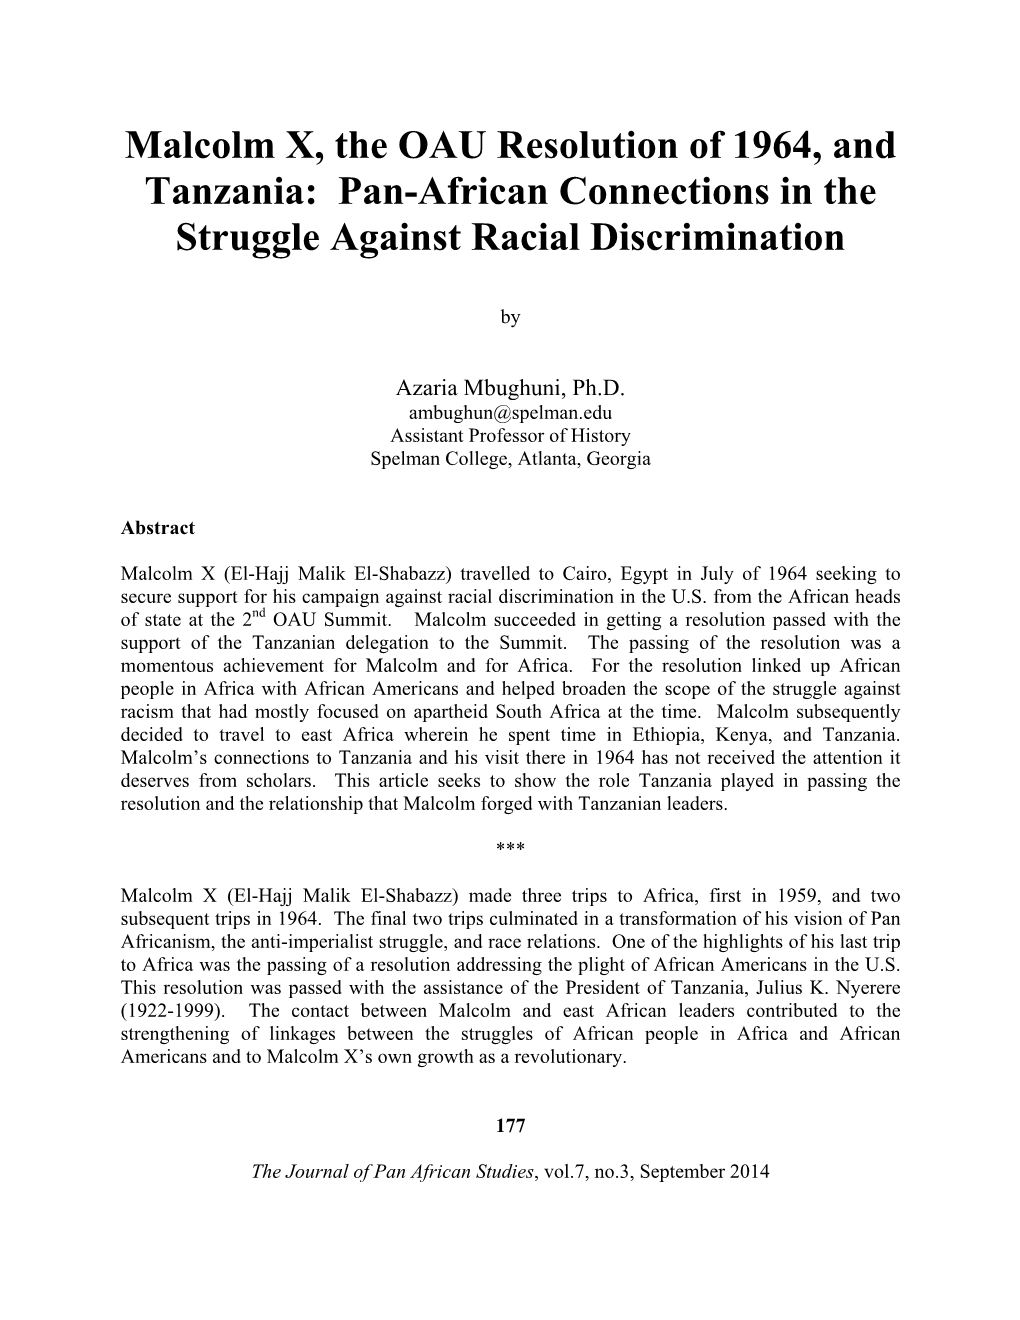 Malcolm X, the OAU Resolution of 1964, and Tanzania: Pan-African Connections in the Struggle Against Racial Discrimination